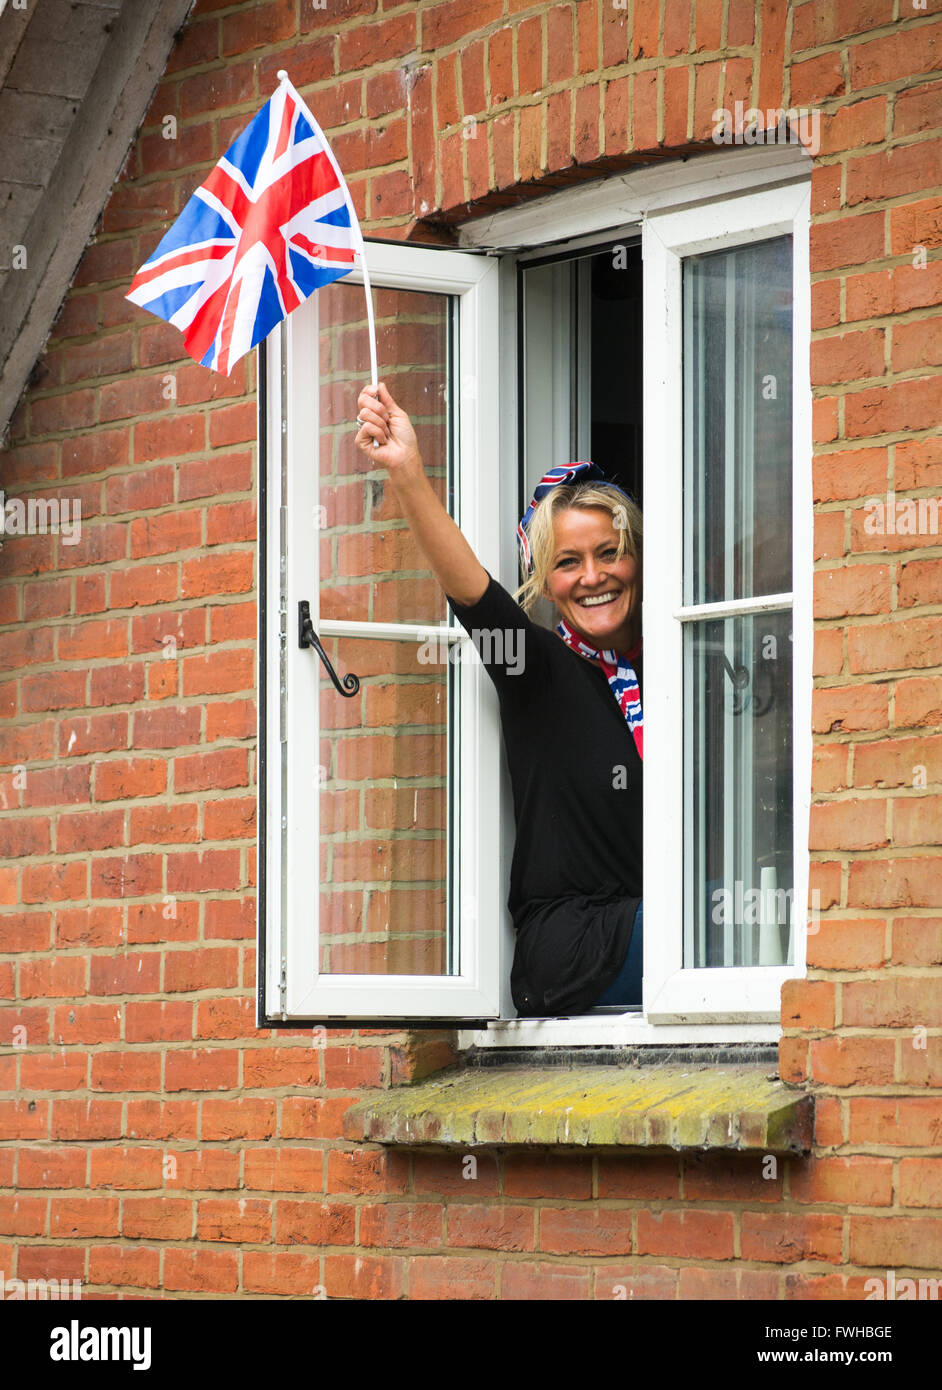 Happy, smiling woman waving a Union Jack flag from a window. Stock Photo